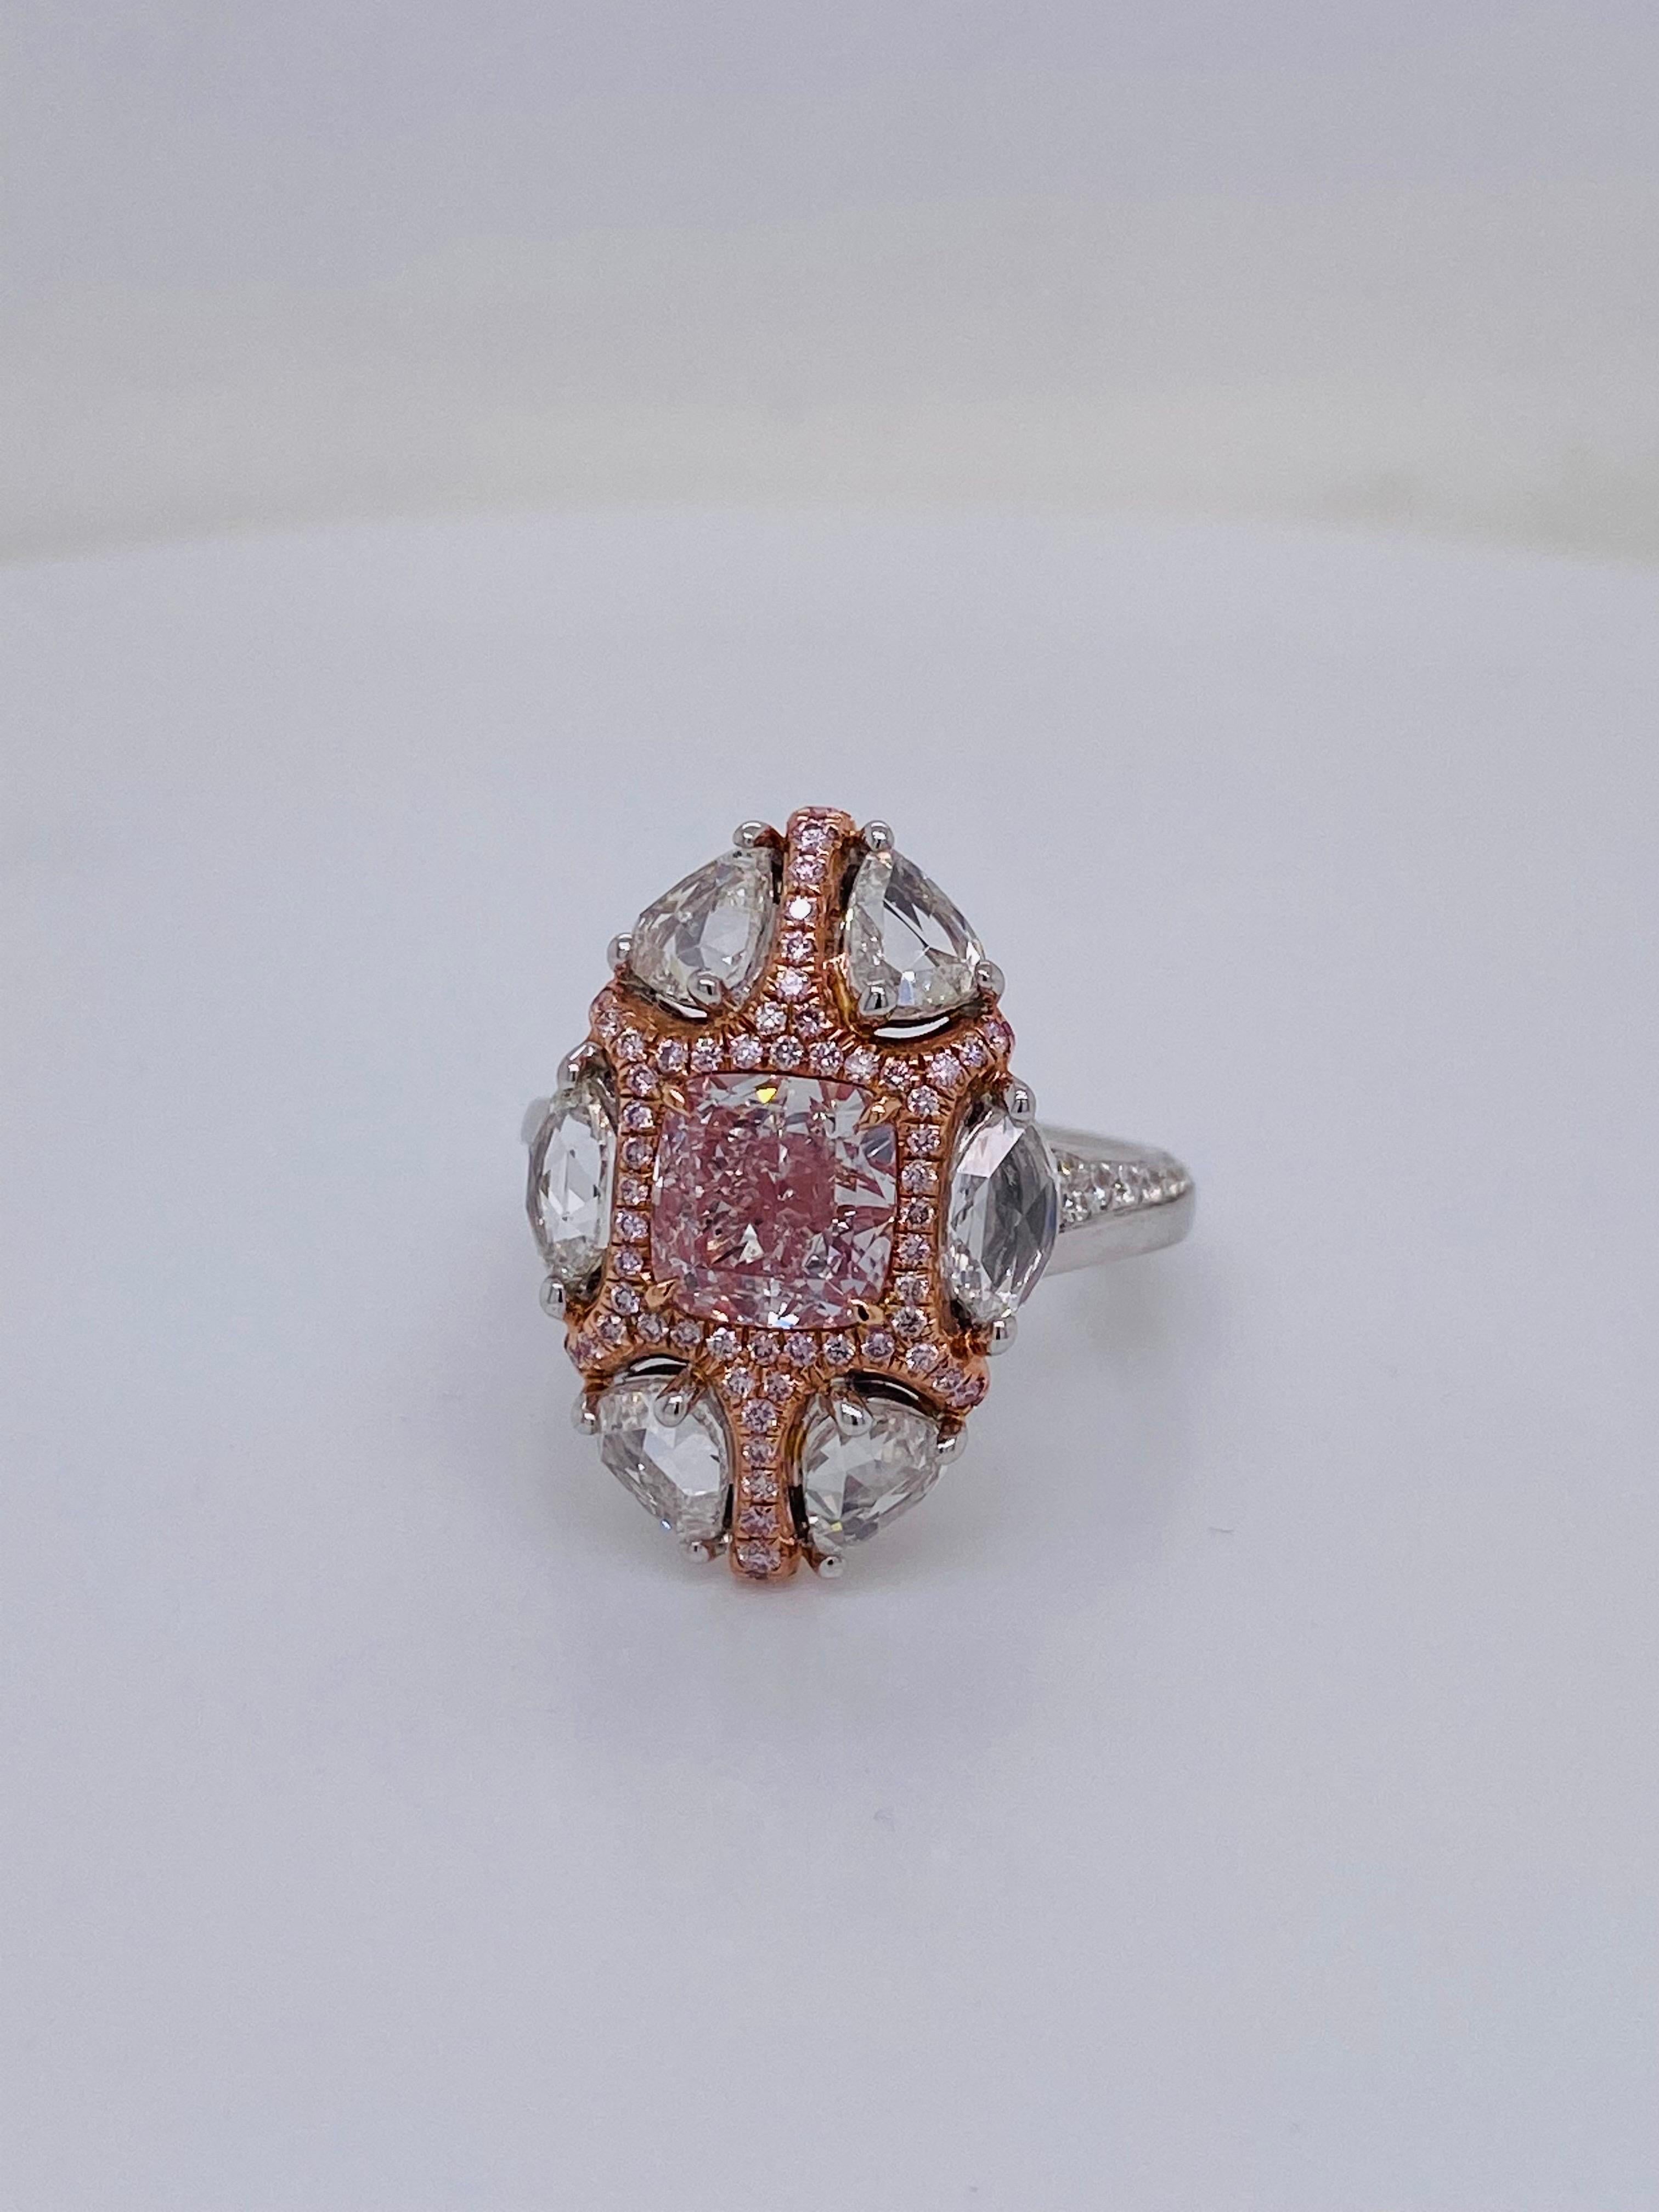 From the vault at Emilio Jewelry, Located On New York’s Iconic Fifth Avenue:
center diamond just over 1.70ct fancy faint pinkish brown set in a unique mounting featuring rose cut marquise, pink diamonds, and round white totaling approximately 2.30ct